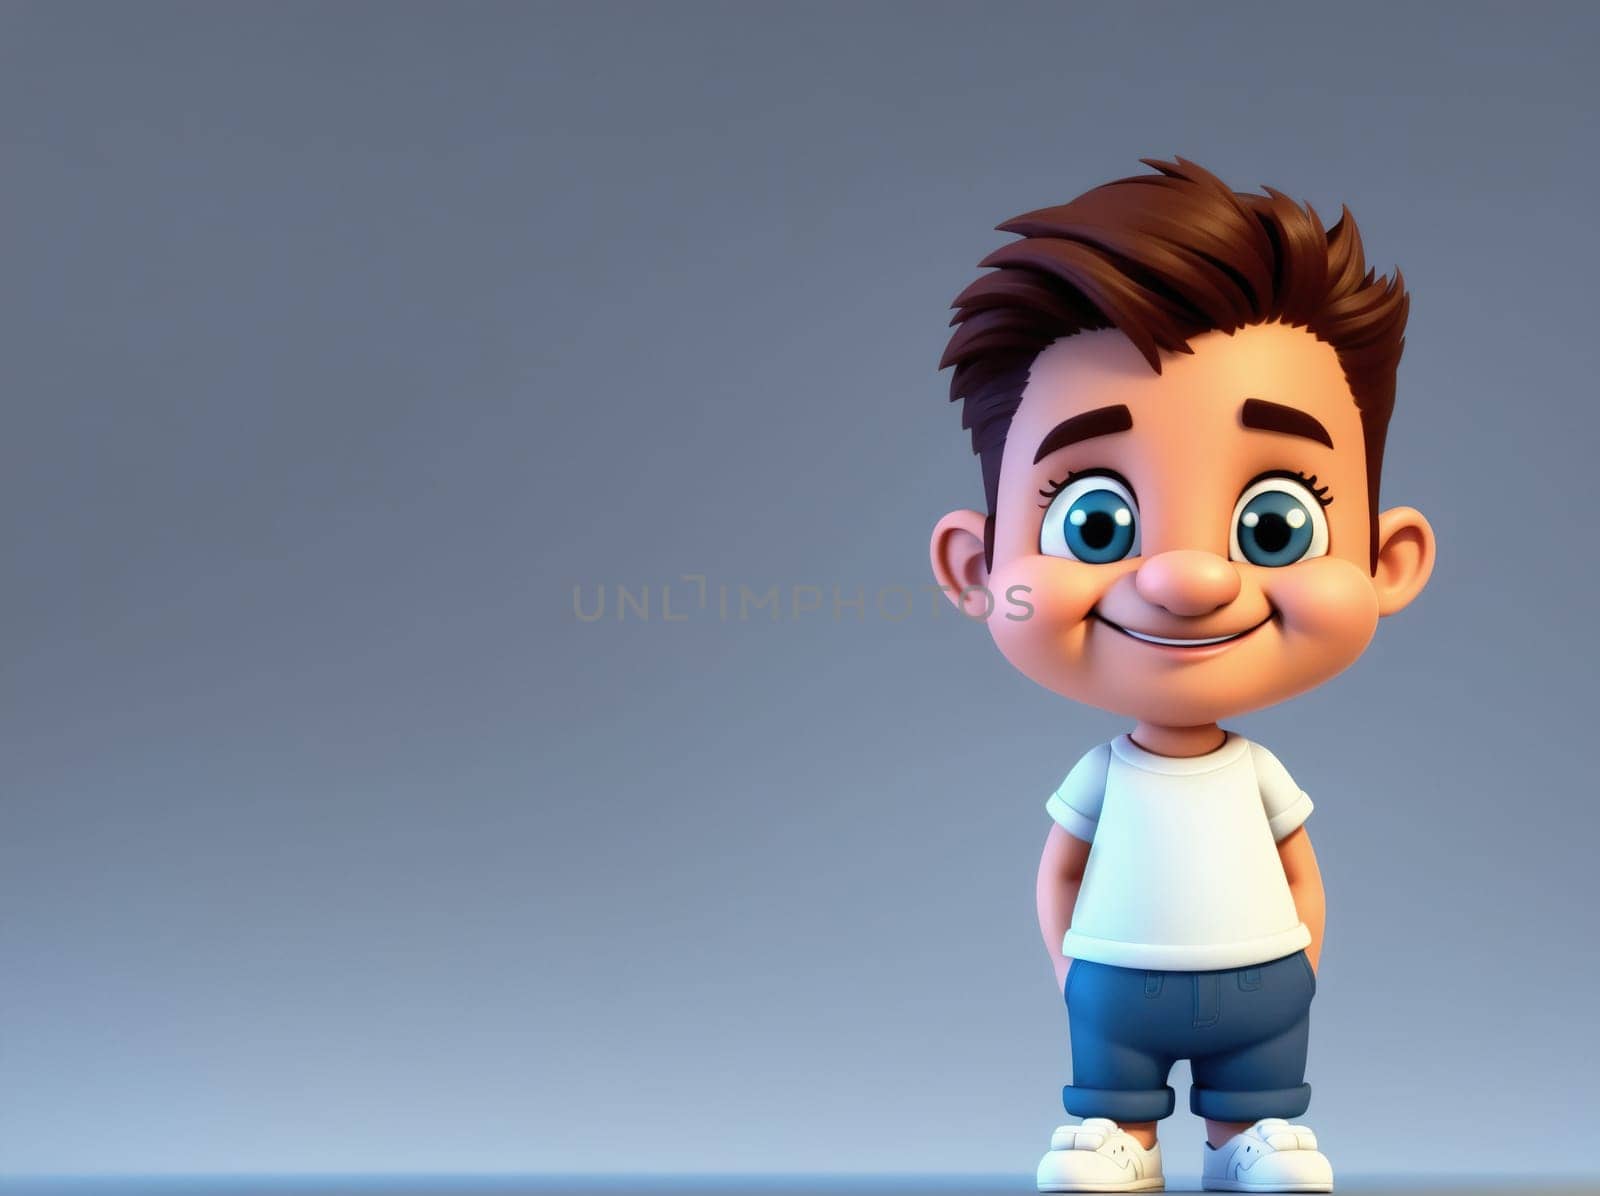 The image is a 3D rendering of a young boy standing with his hands on his hips, looking up at the camera.